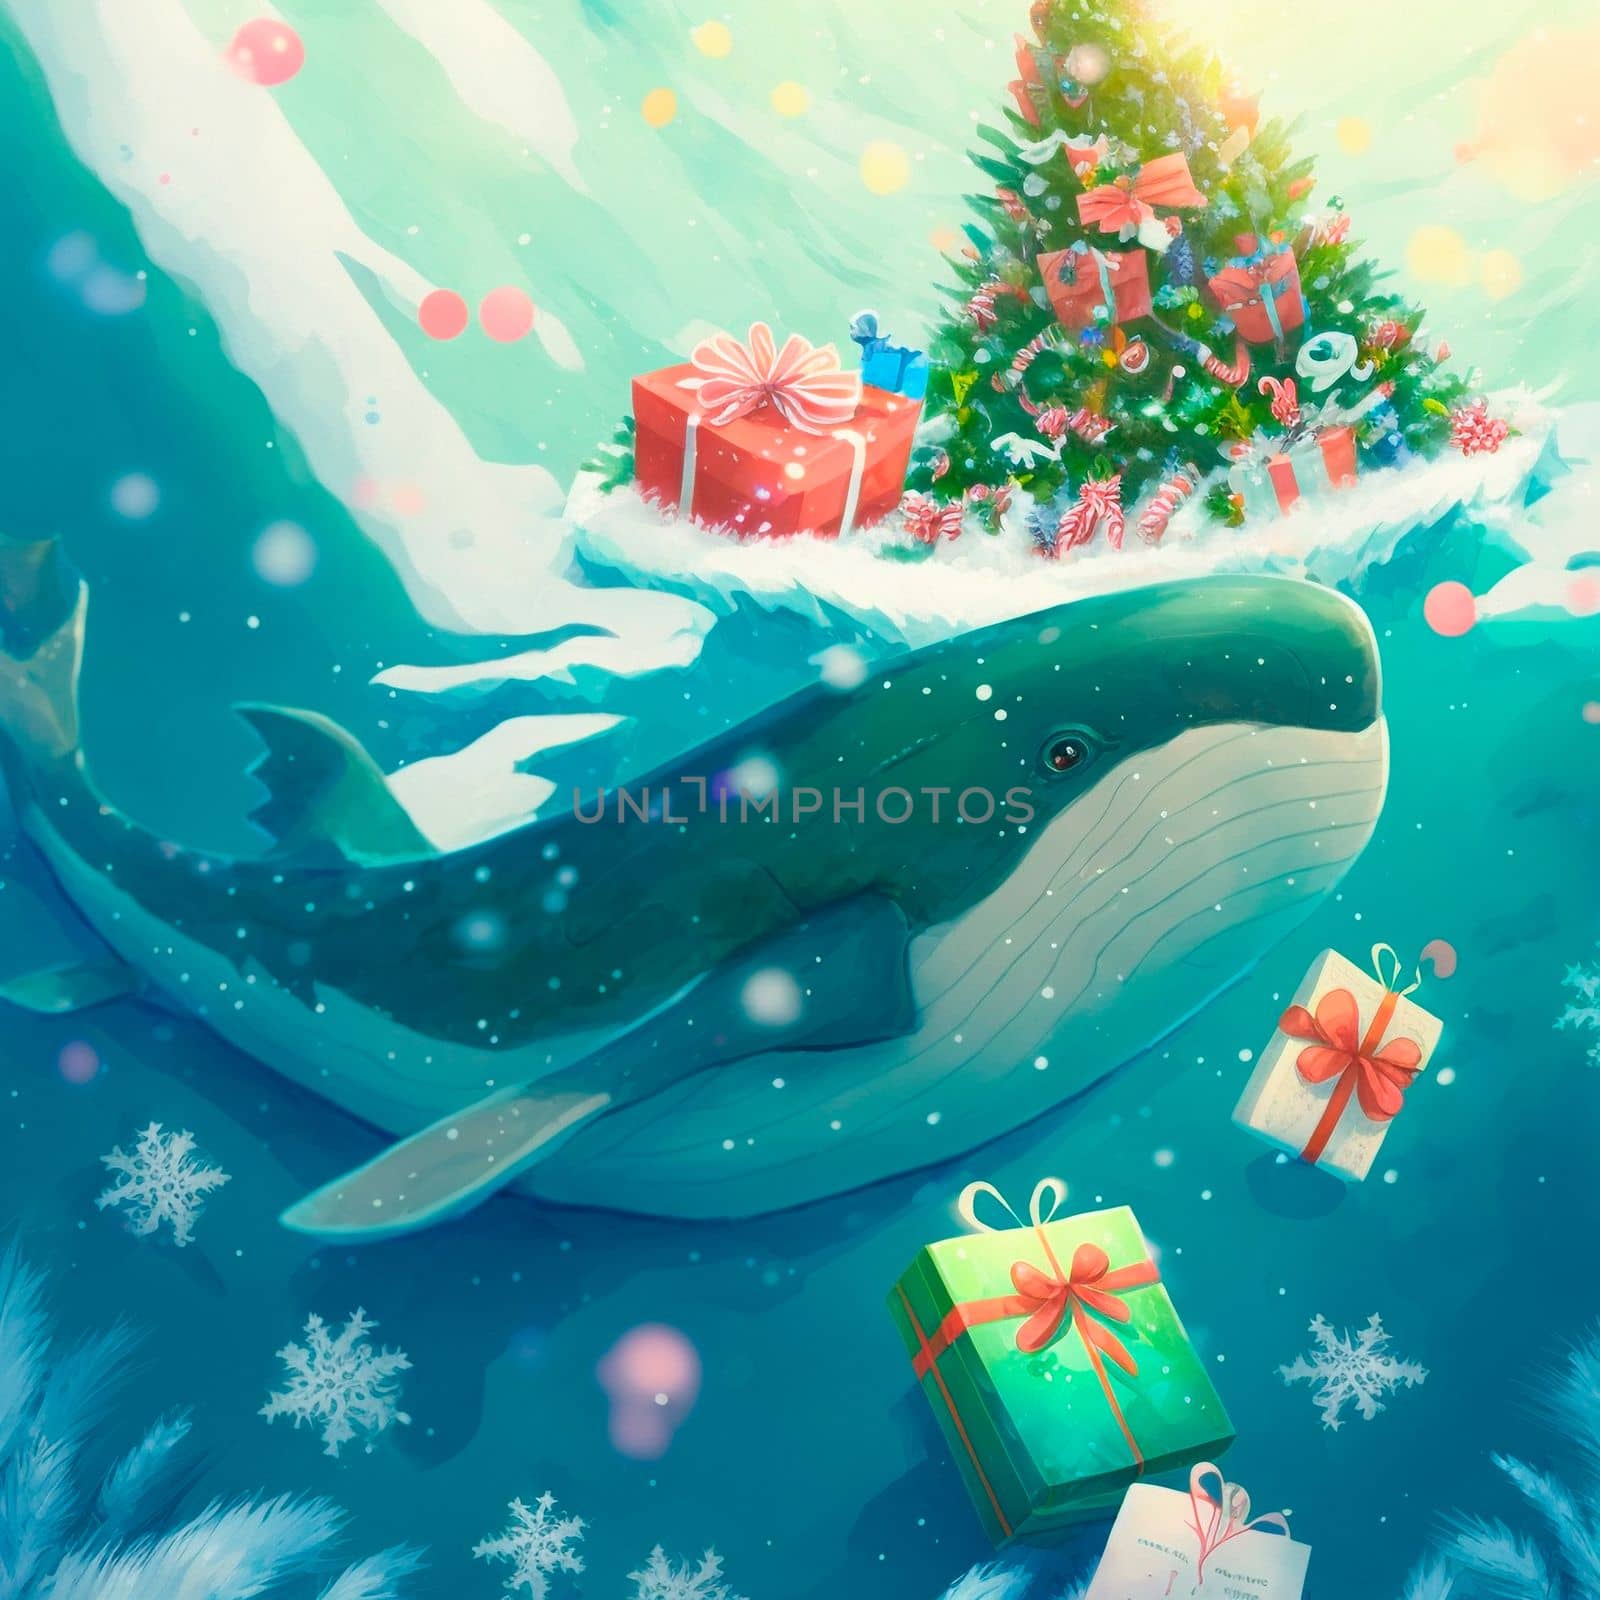 Christmas whales with gifts. High quality illustration